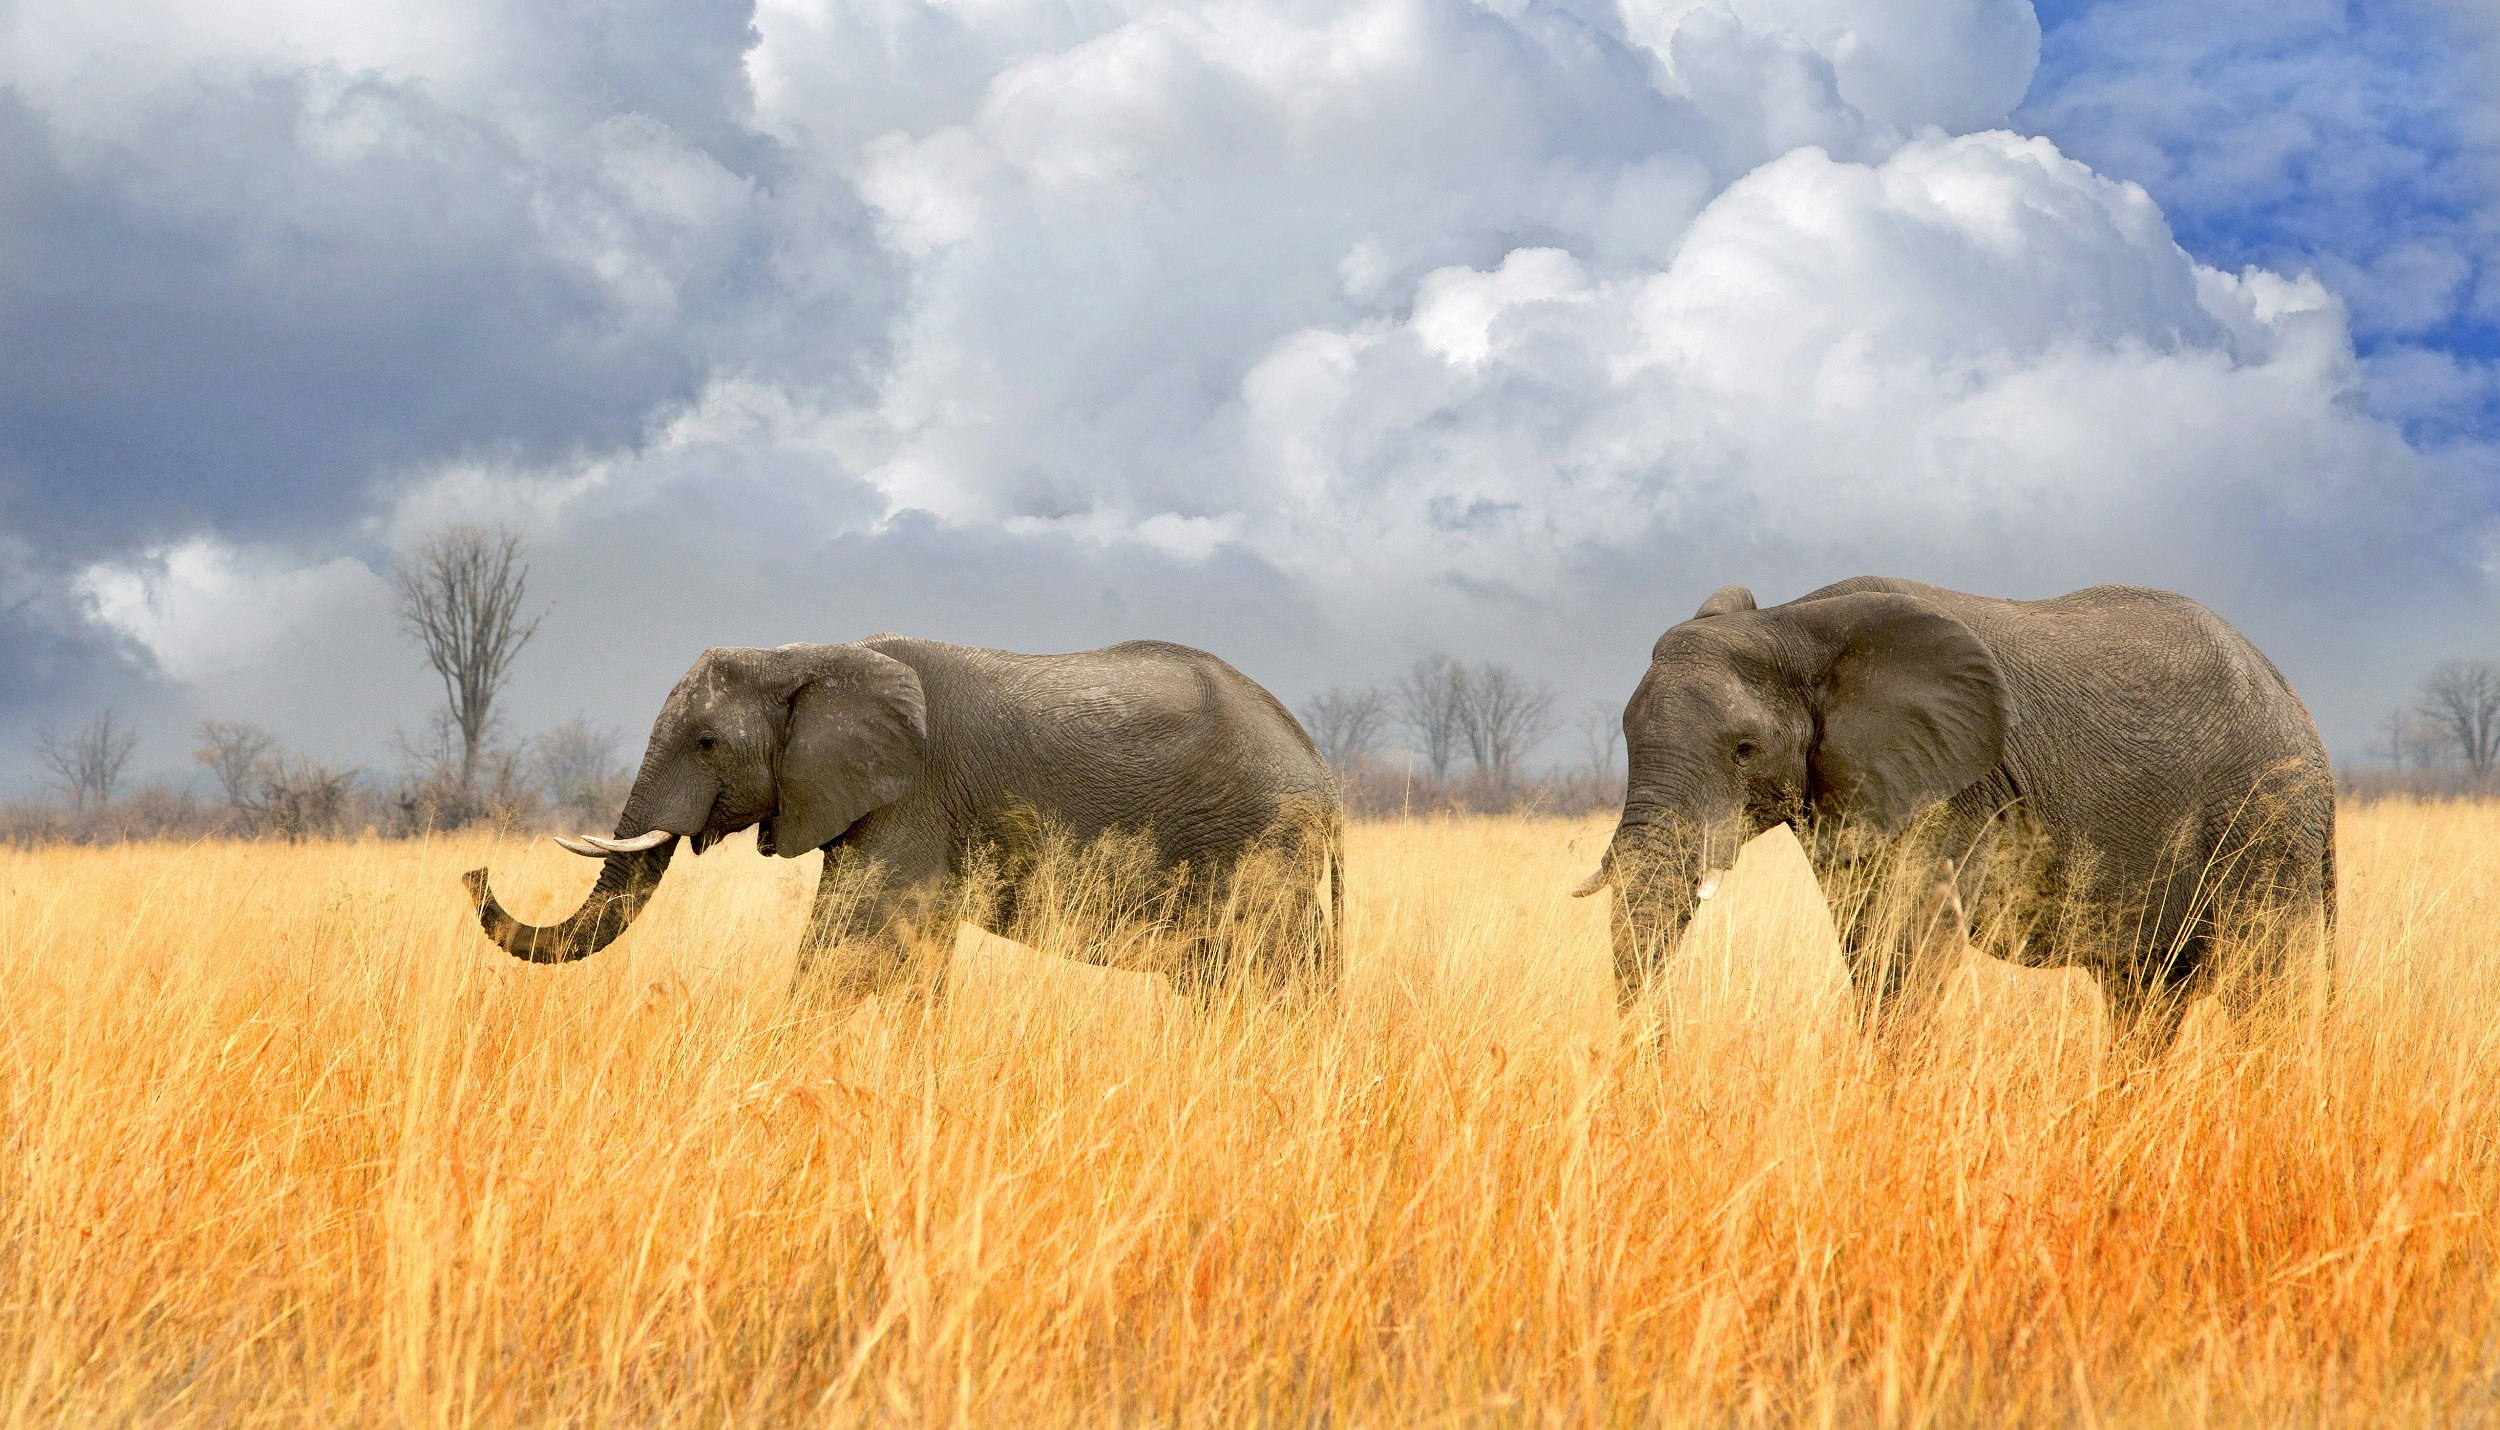 Two elephants walk (from right to left) in very deep golden grasses; the elephant at the front has its trunk raised skyward. In the background is a moody sky with billowy clouds.